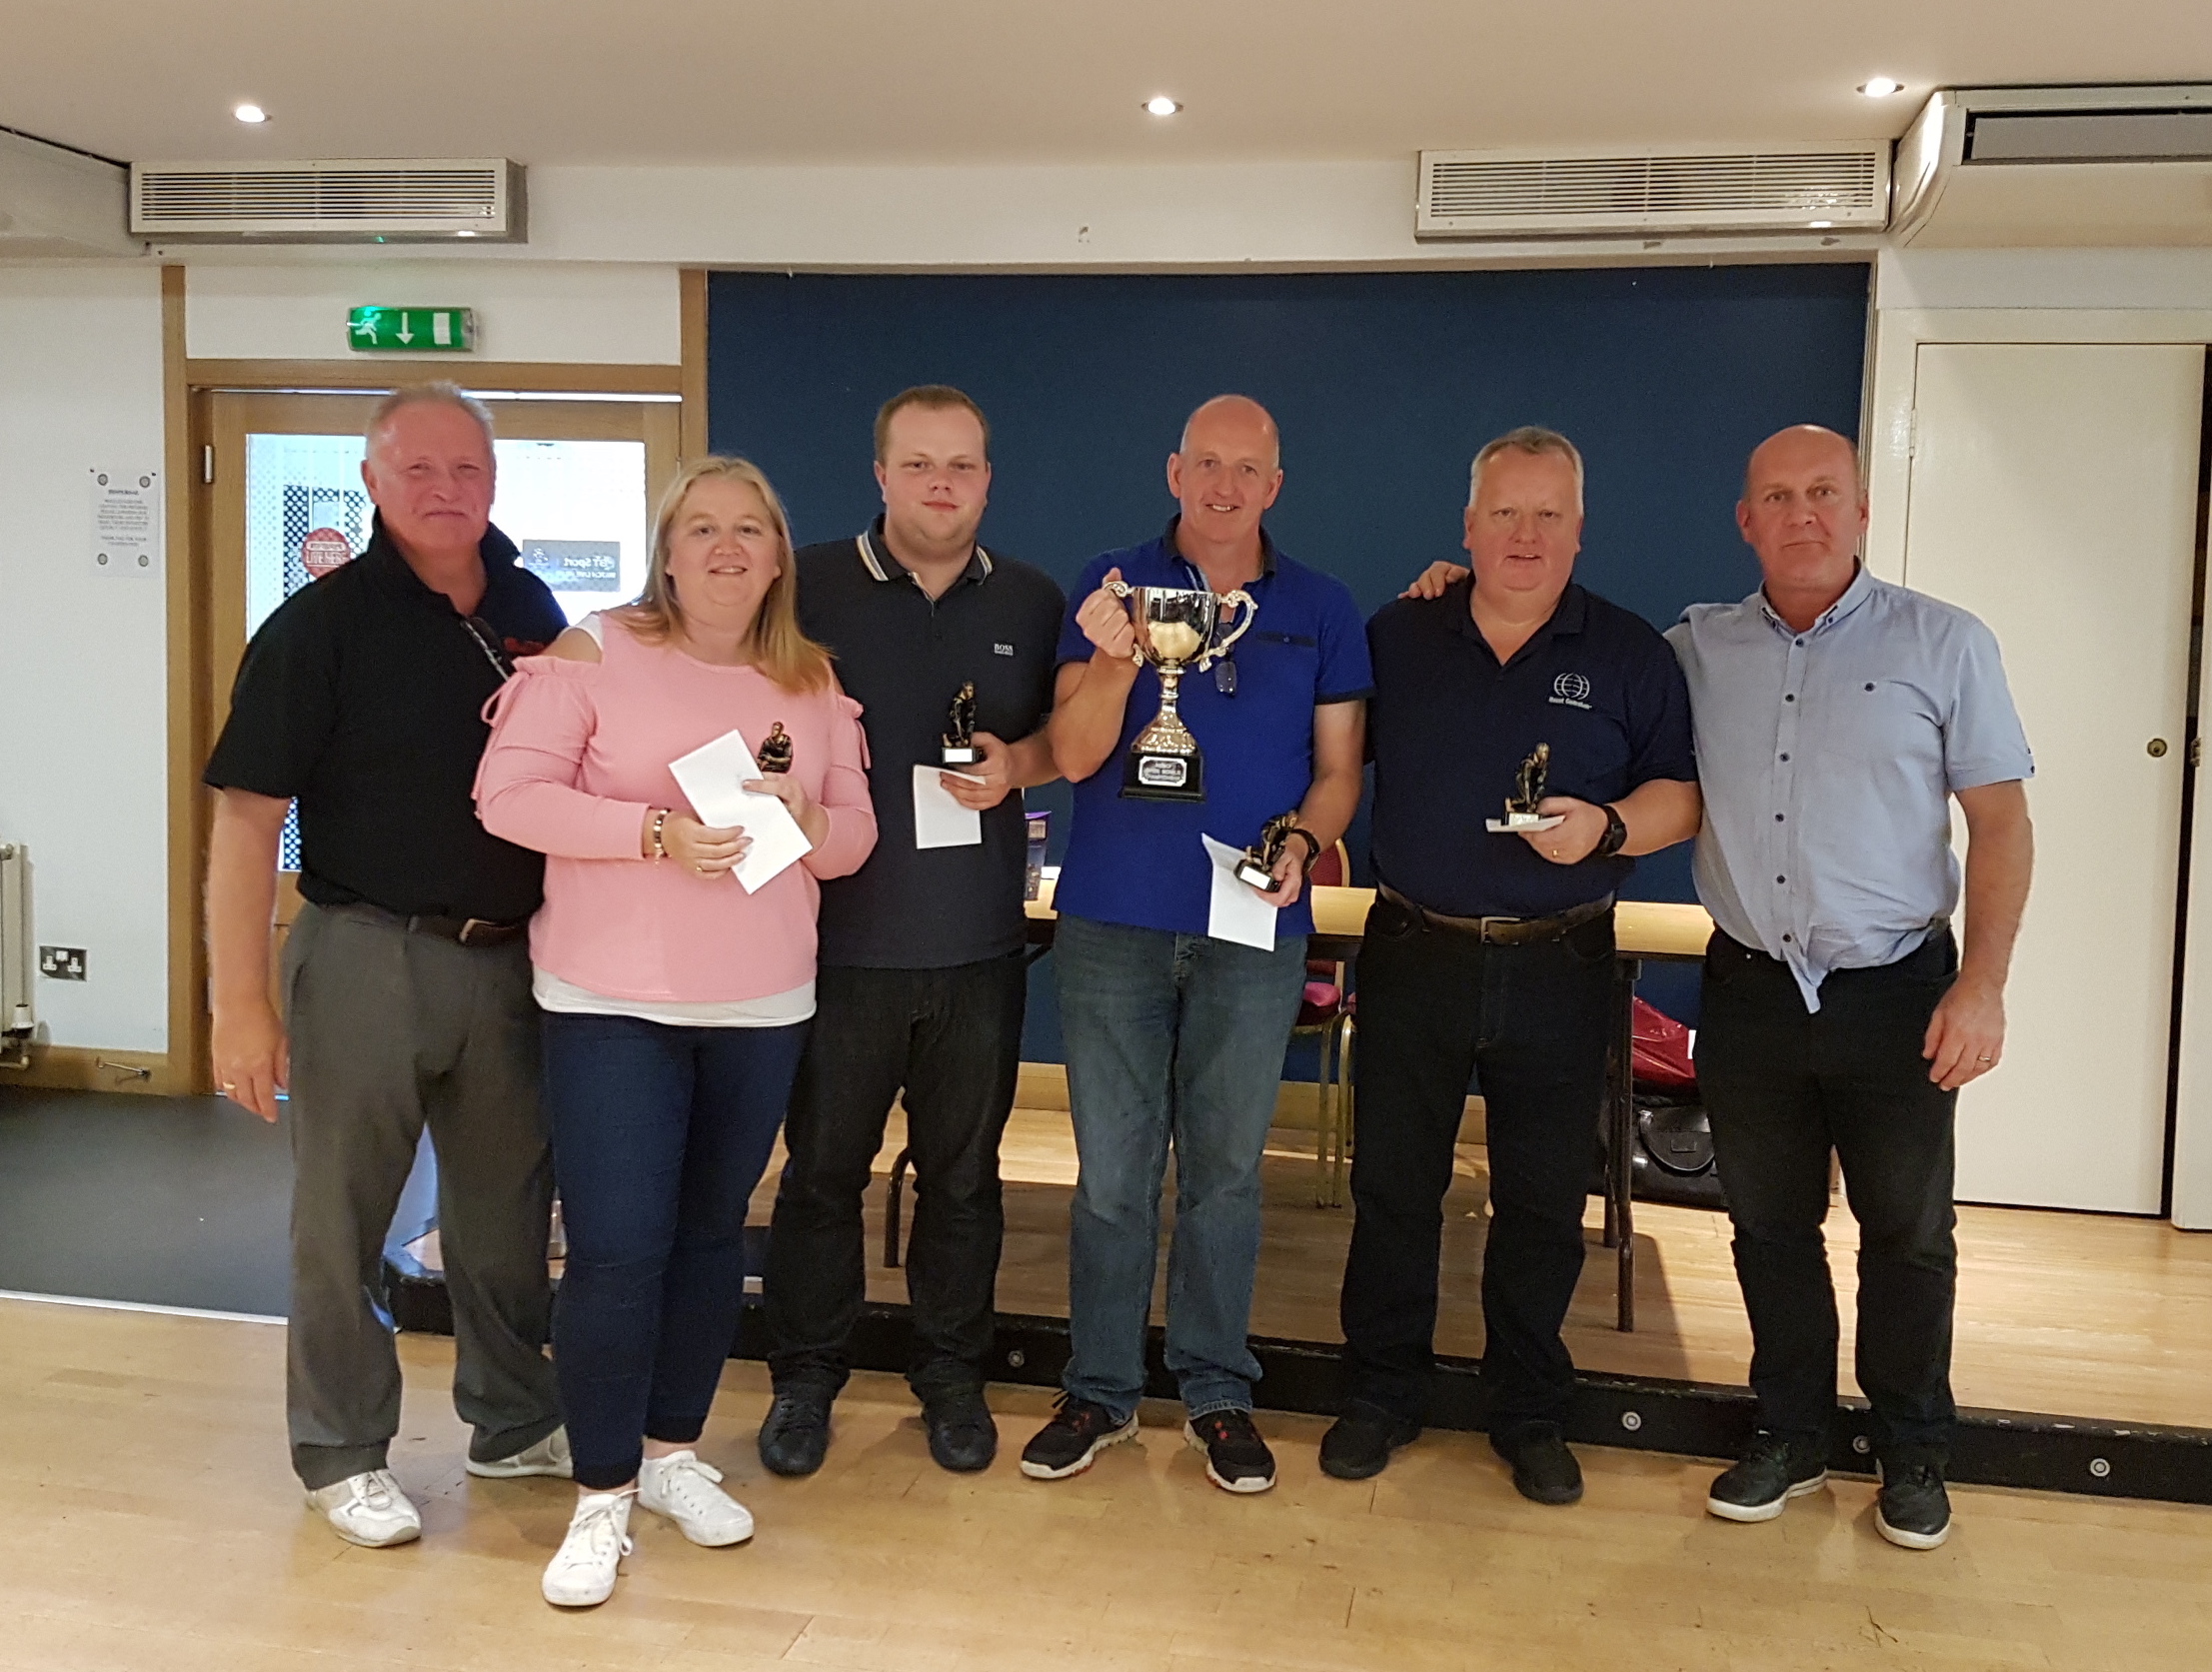 Elite Control Systems and North British Distillery compete in Annual Lawn Bowls Day for Friends of Chernobyl's Children (FOCC)